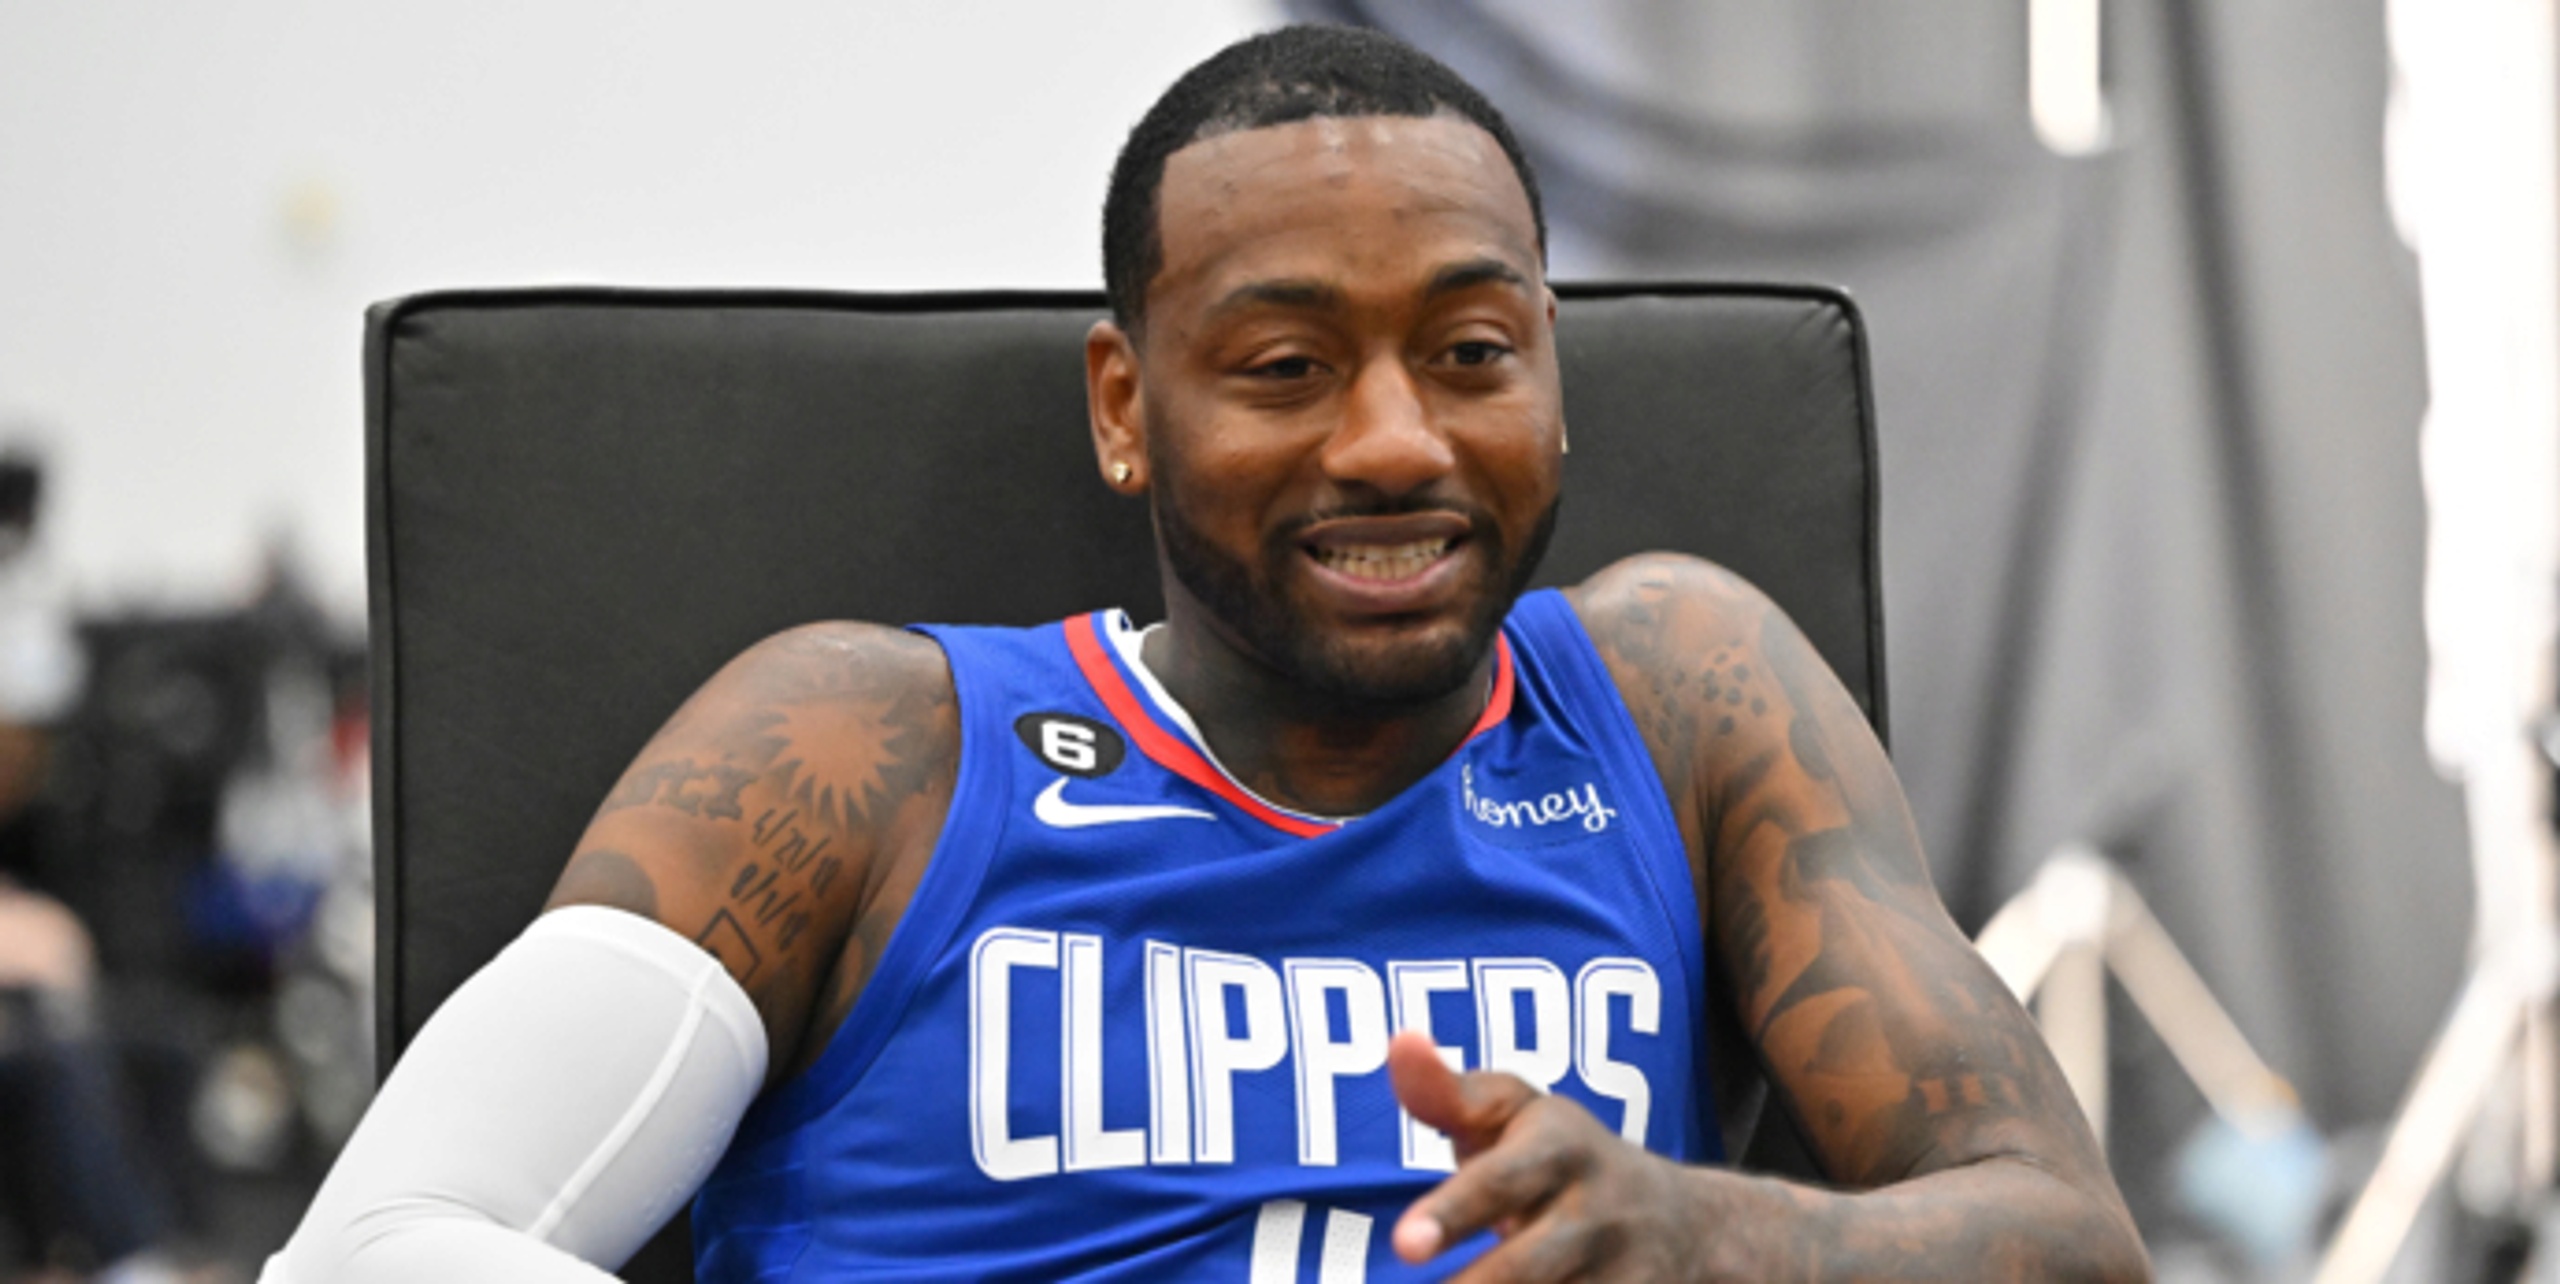 John Wall ready to make triumphant return with Clippers